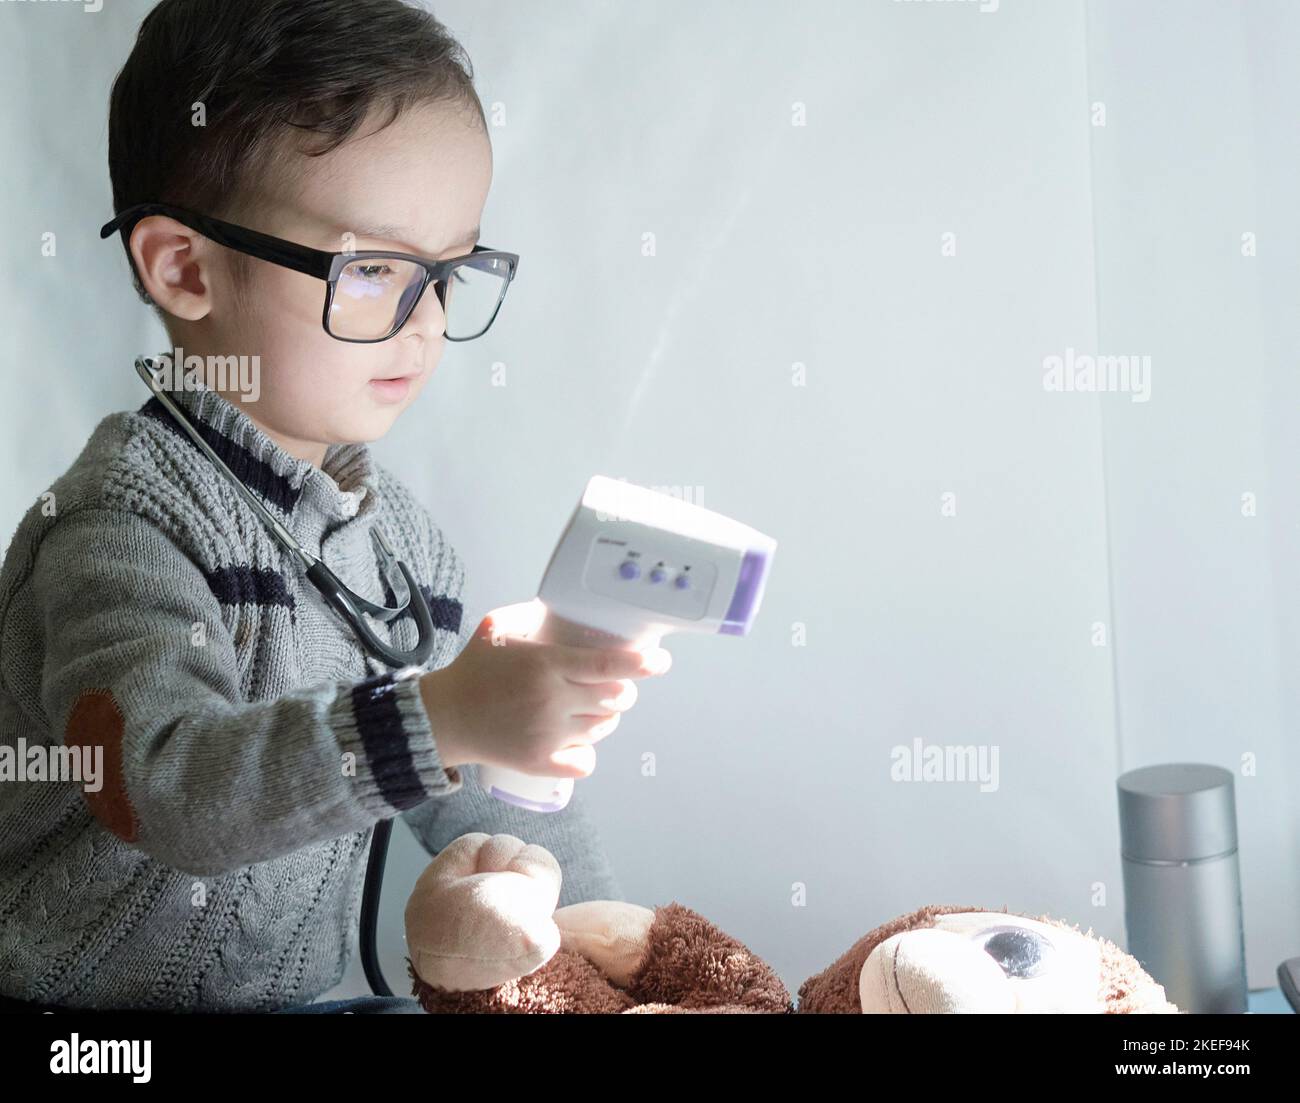 a young boy playing with a remote control device and stuffed animals on a table in front of the tv screen Stock Photo